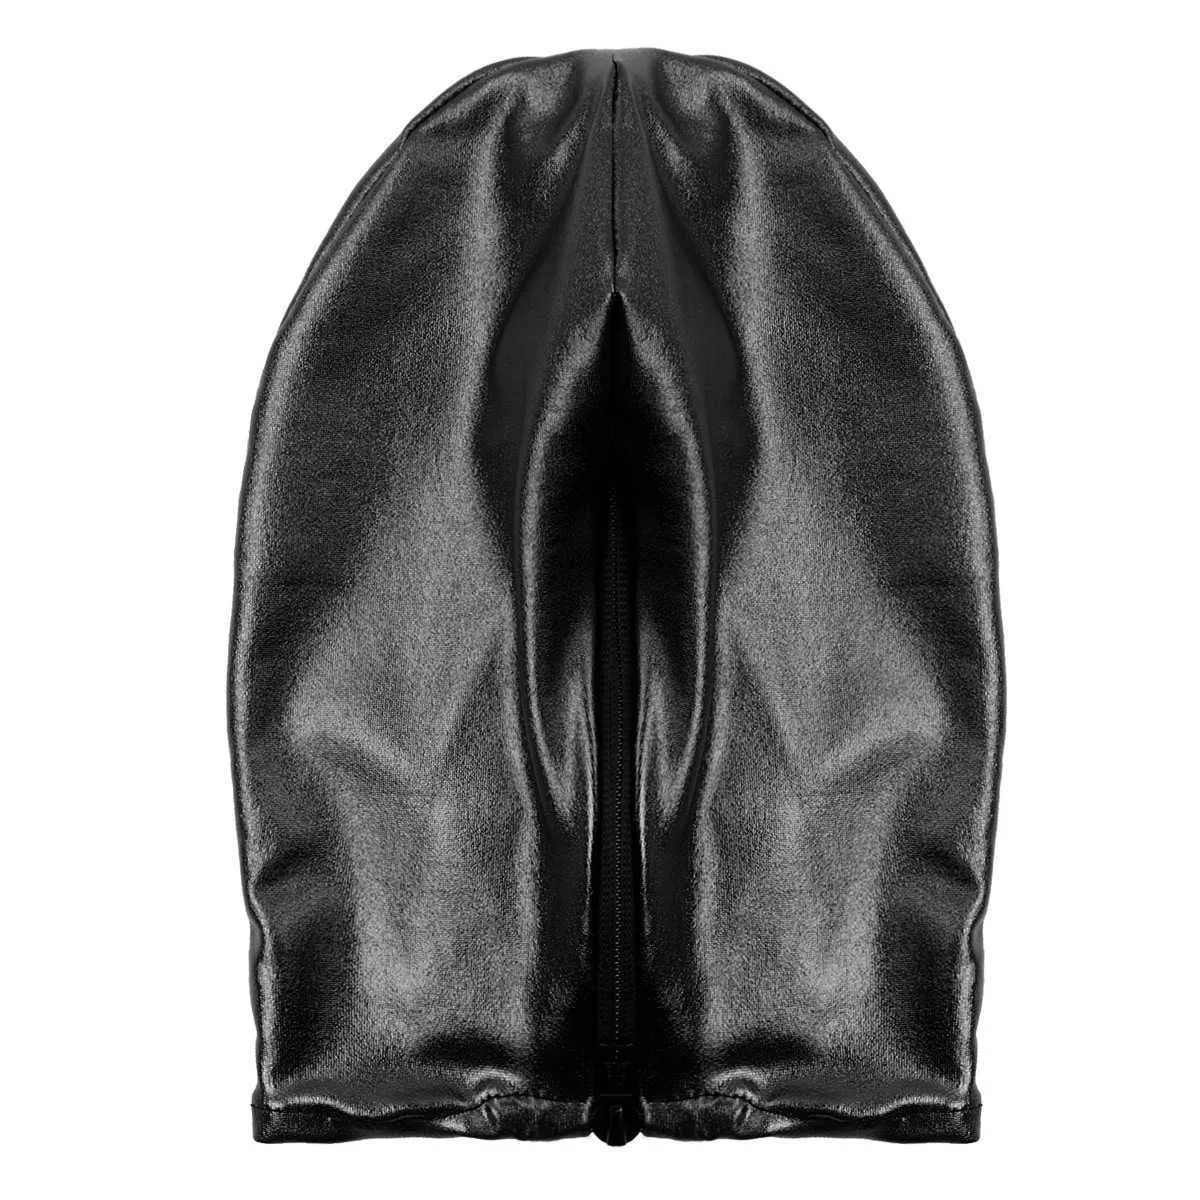 Sexy Unisexe Men Femmes Cosplay Face Mask Hood For Role Play Costume Latex Shiny Metallic Open Mouth Hole Hadgear Full Face Mask Q03239848